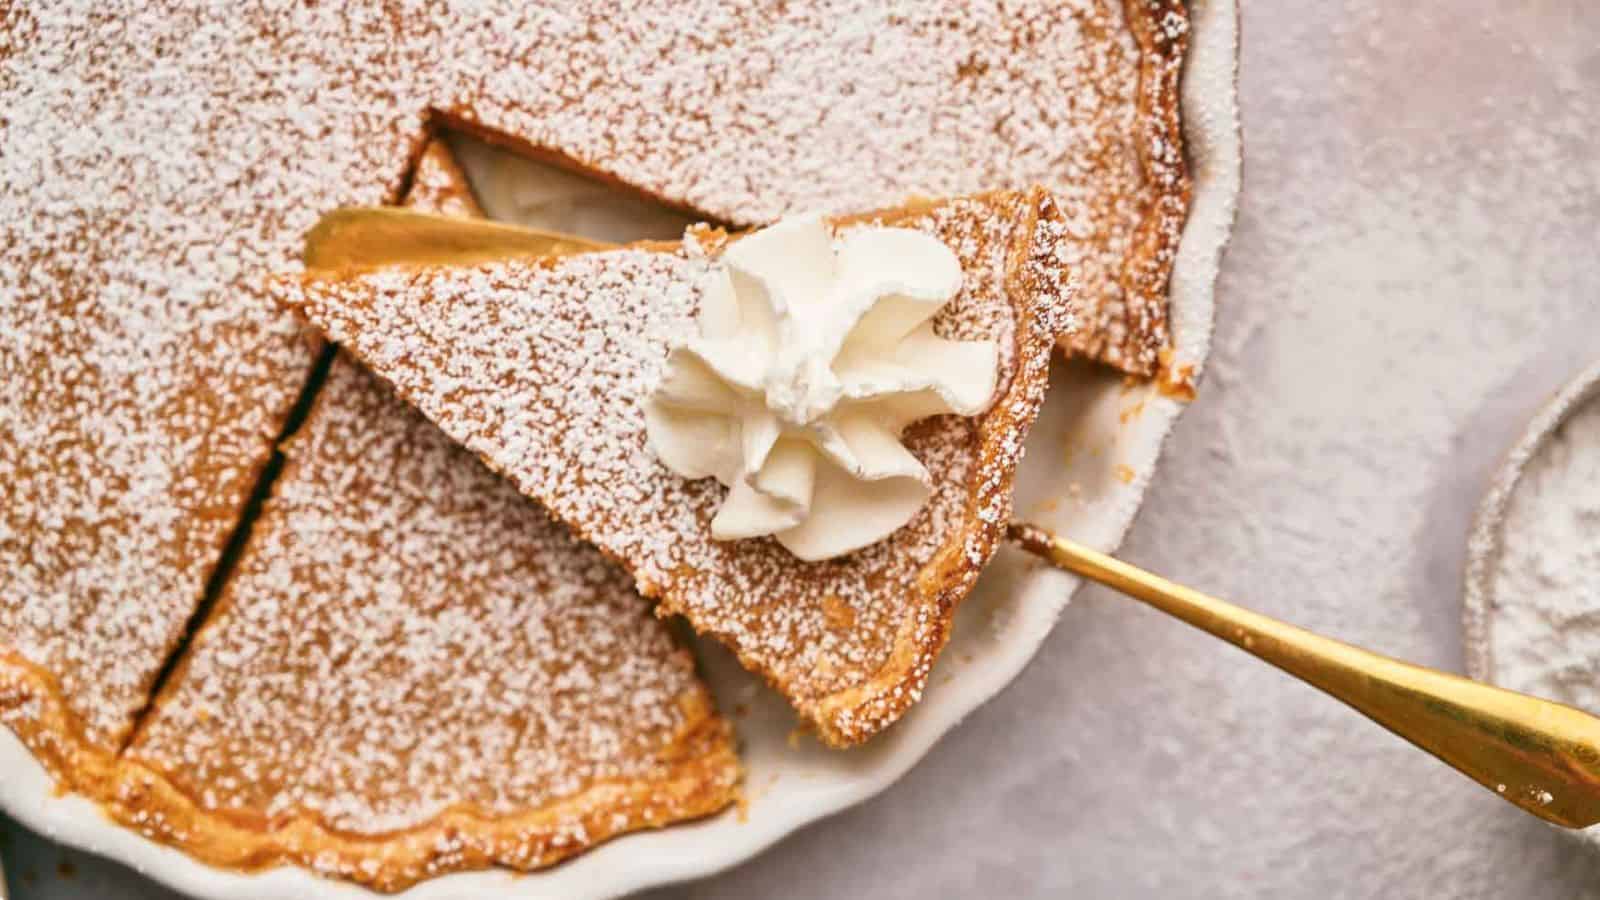 <p>Spice up your Sunday dessert game with cinnamon pie. It’s a unique, aromatic treat that’s a delightful end to any meal.<br><strong>Get the Recipe: </strong><a href="https://www.splashoftaste.com/cinnamon-pie-recipe/?utm_source=msn&utm_medium=page&utm_campaign=msn">Cinnamon Pie</a></p>